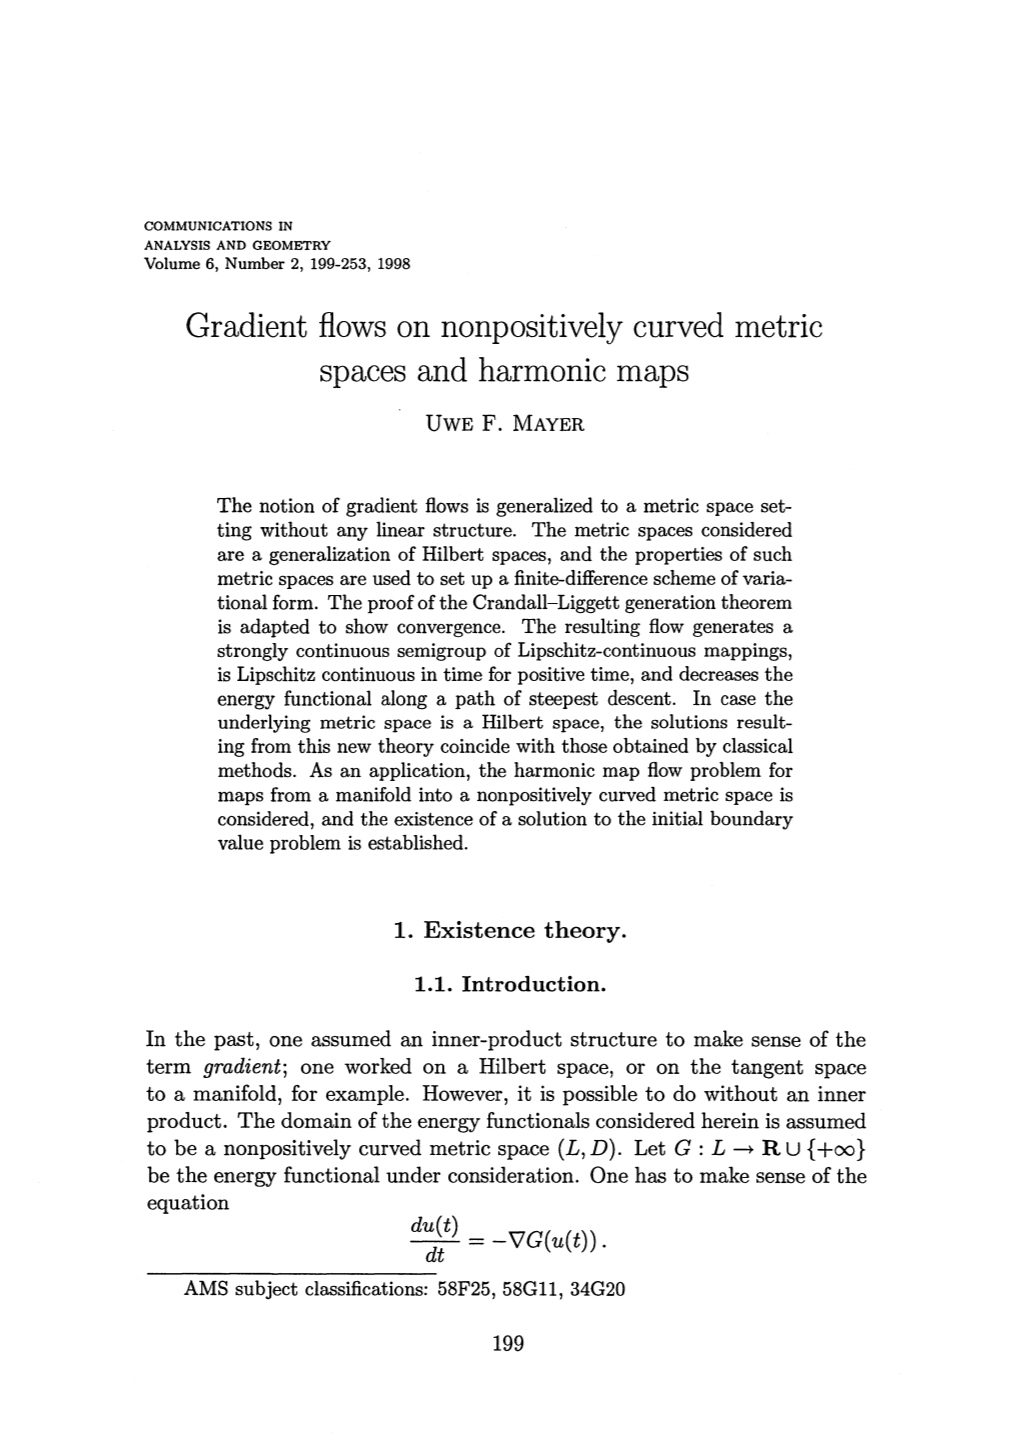 Gradient Flows on Nonpositively Curved Metric Spaces and Harmonic Maps